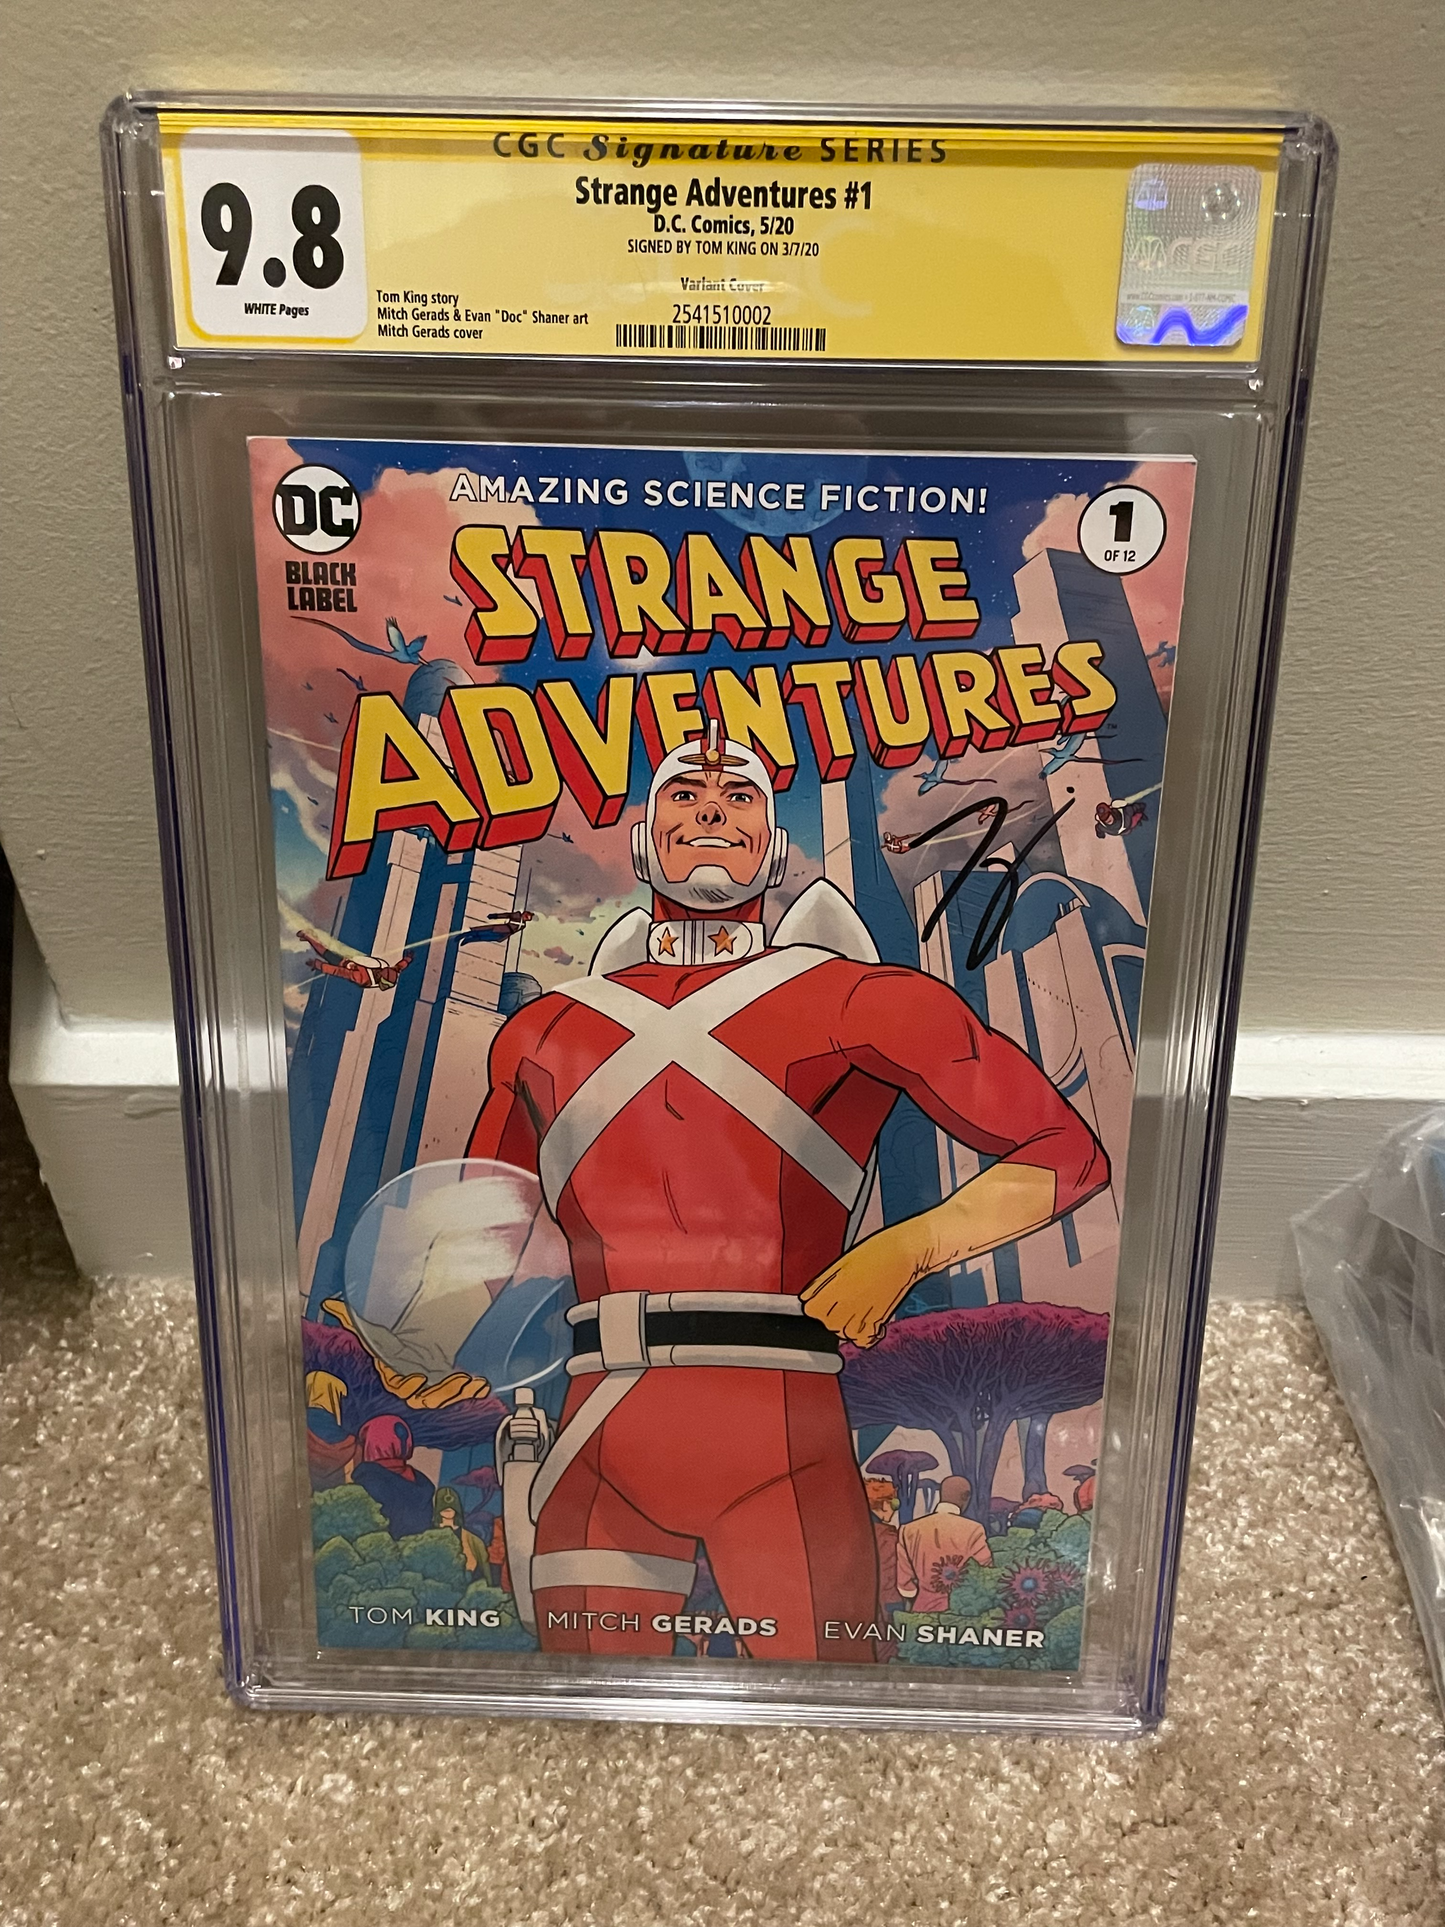 Strange Adventures #1 CGC SS 9.8 Signed by Tom King